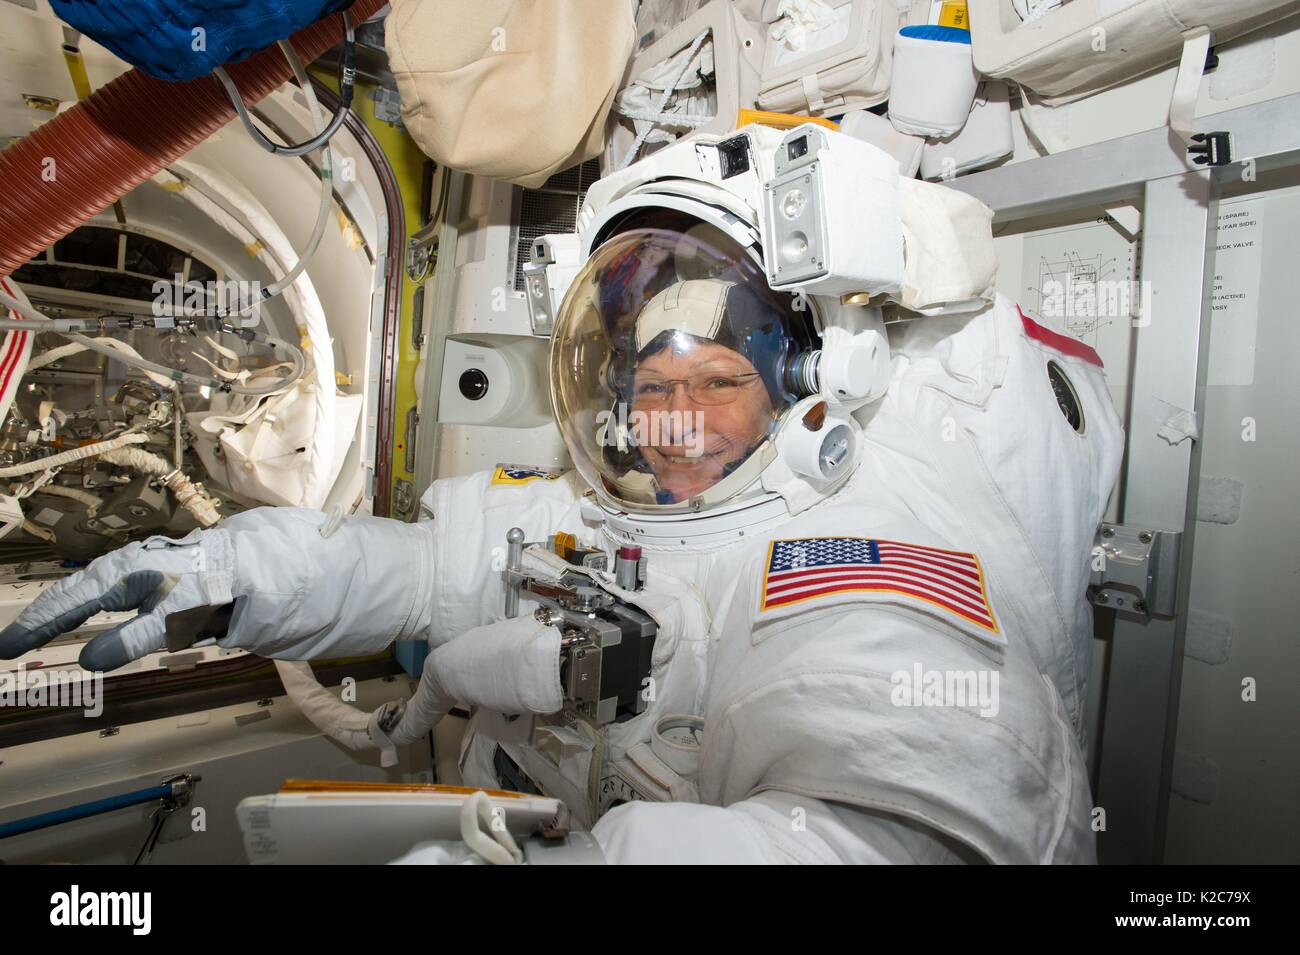 NASA International Space Station Expedition 51 prime crew member American astronaut Peggy Whitson suits up in a spacesuit in preparation for an EVA spacewalk in the ISS Quest airlock May 23, 2017 in Earth orbit. Stock Photo